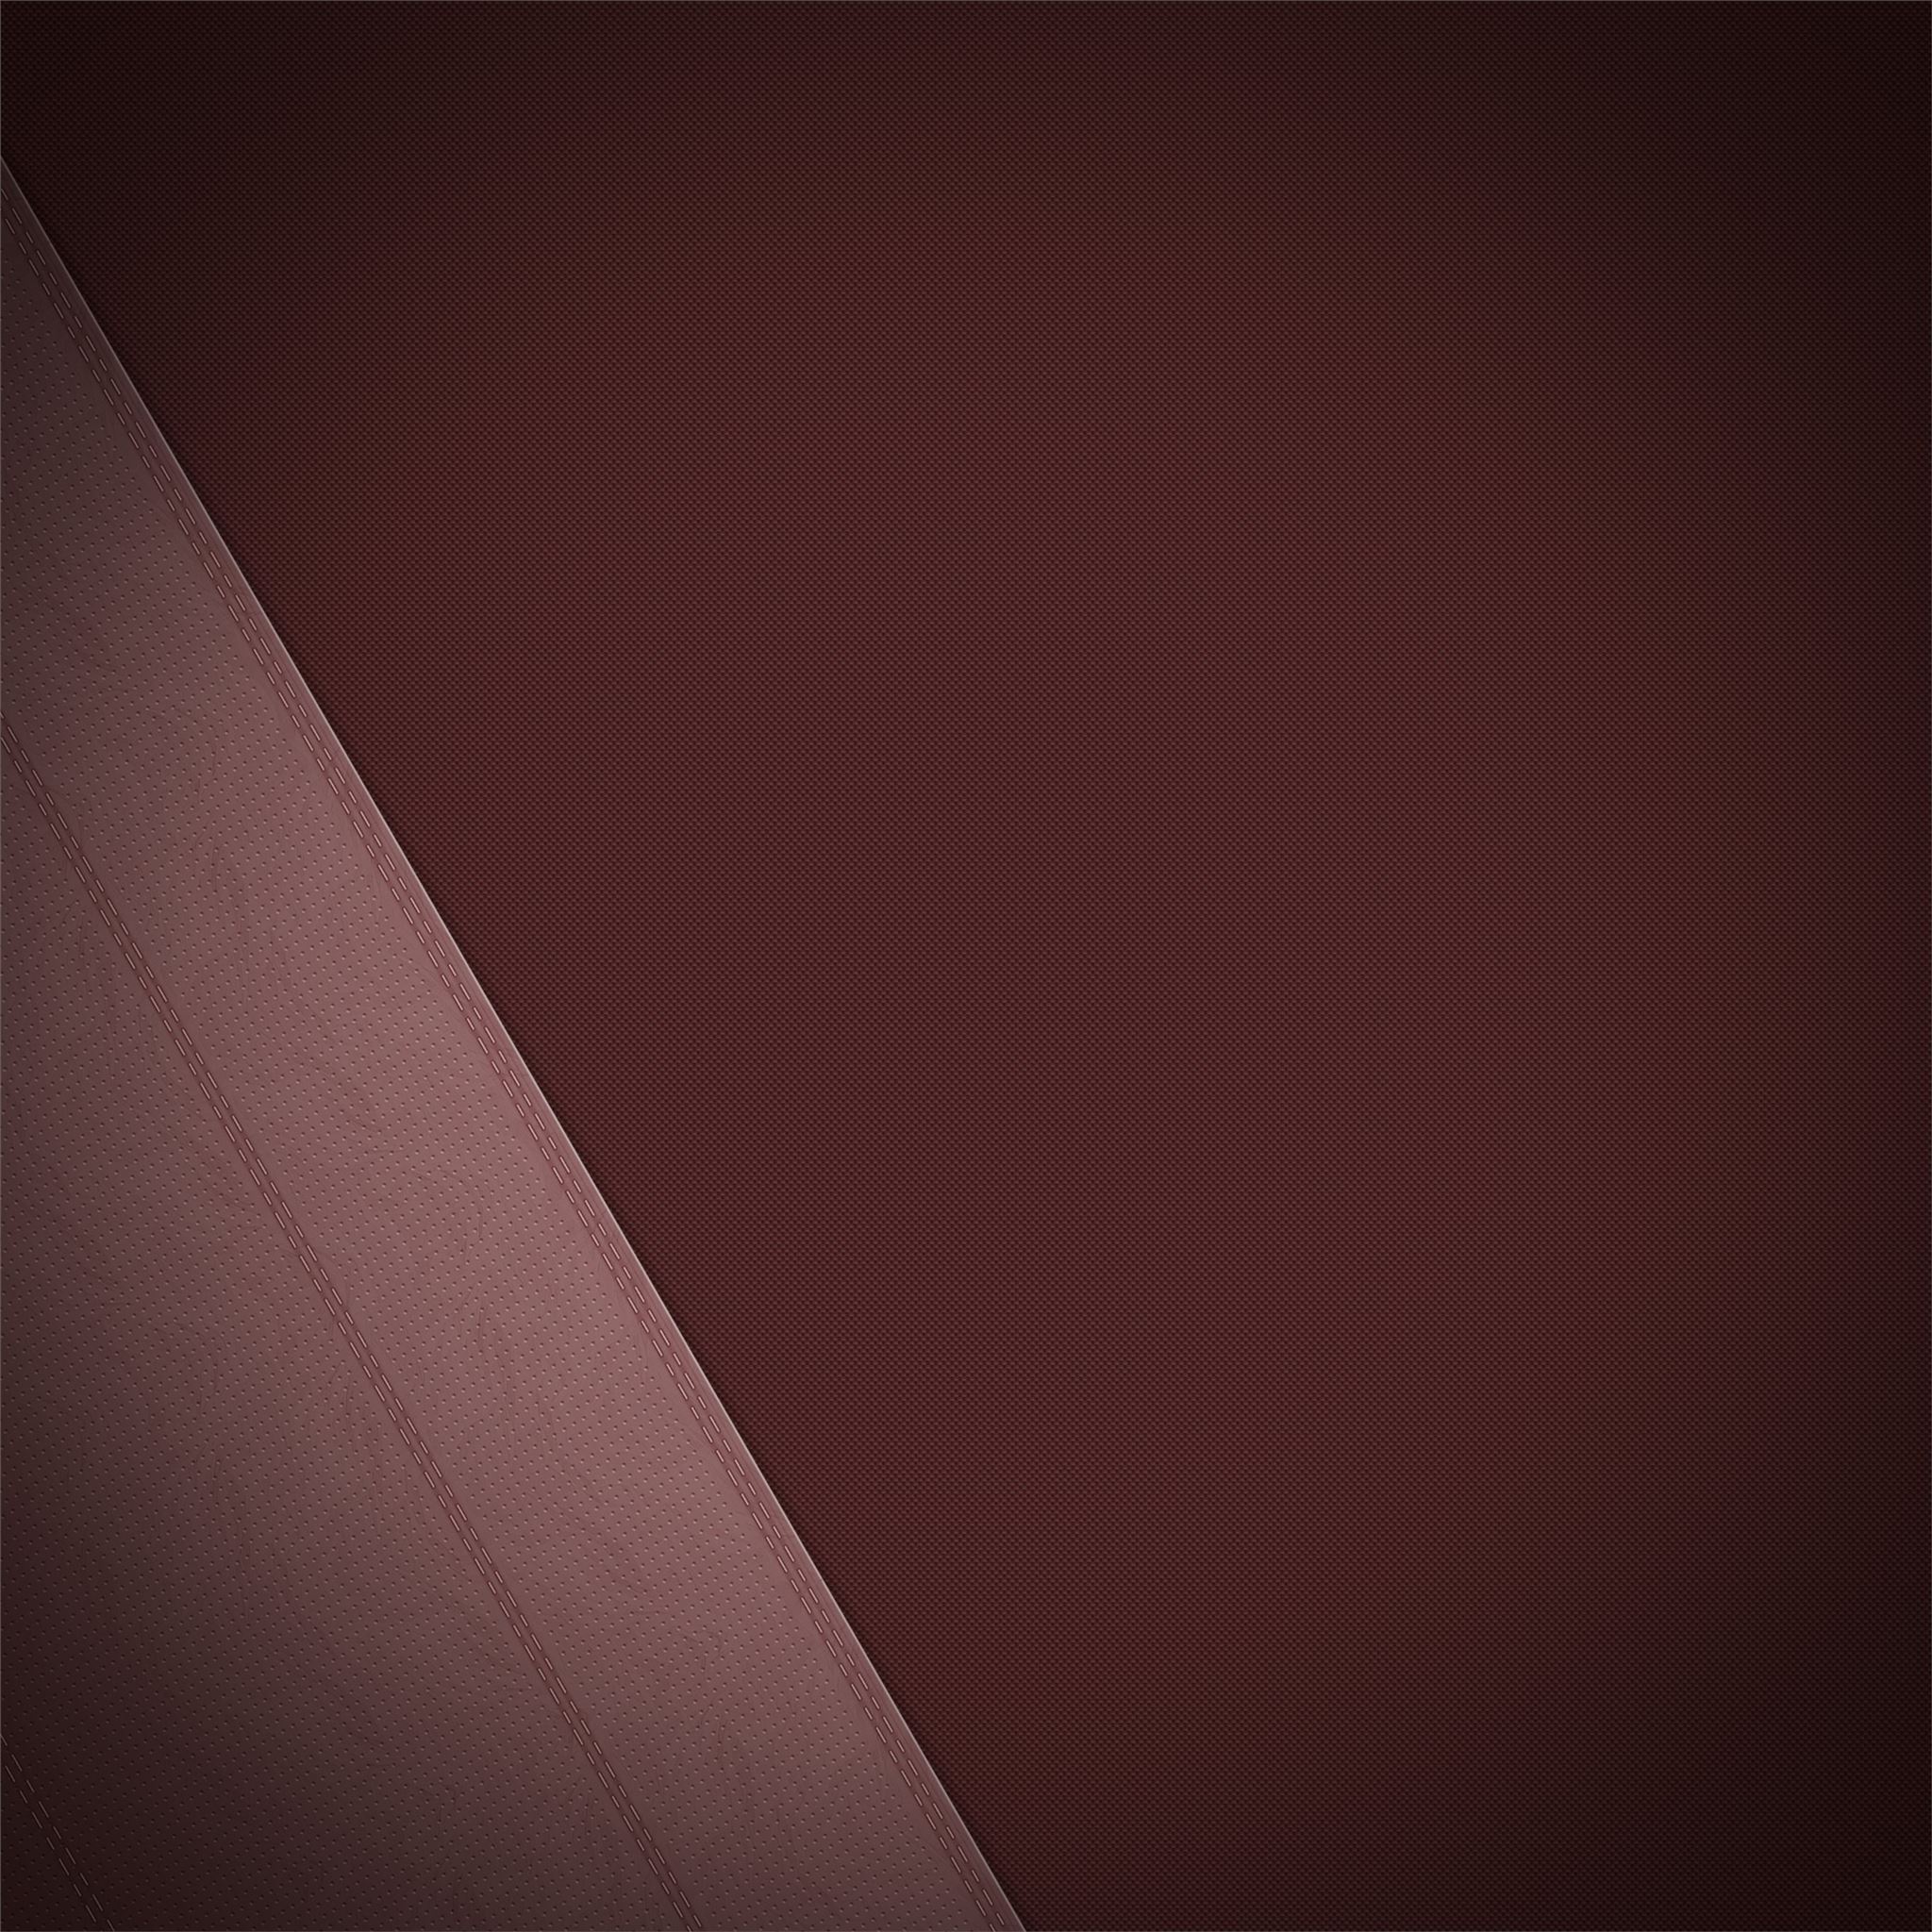 leather texture brown 4k iPad Wallpapers Free Download